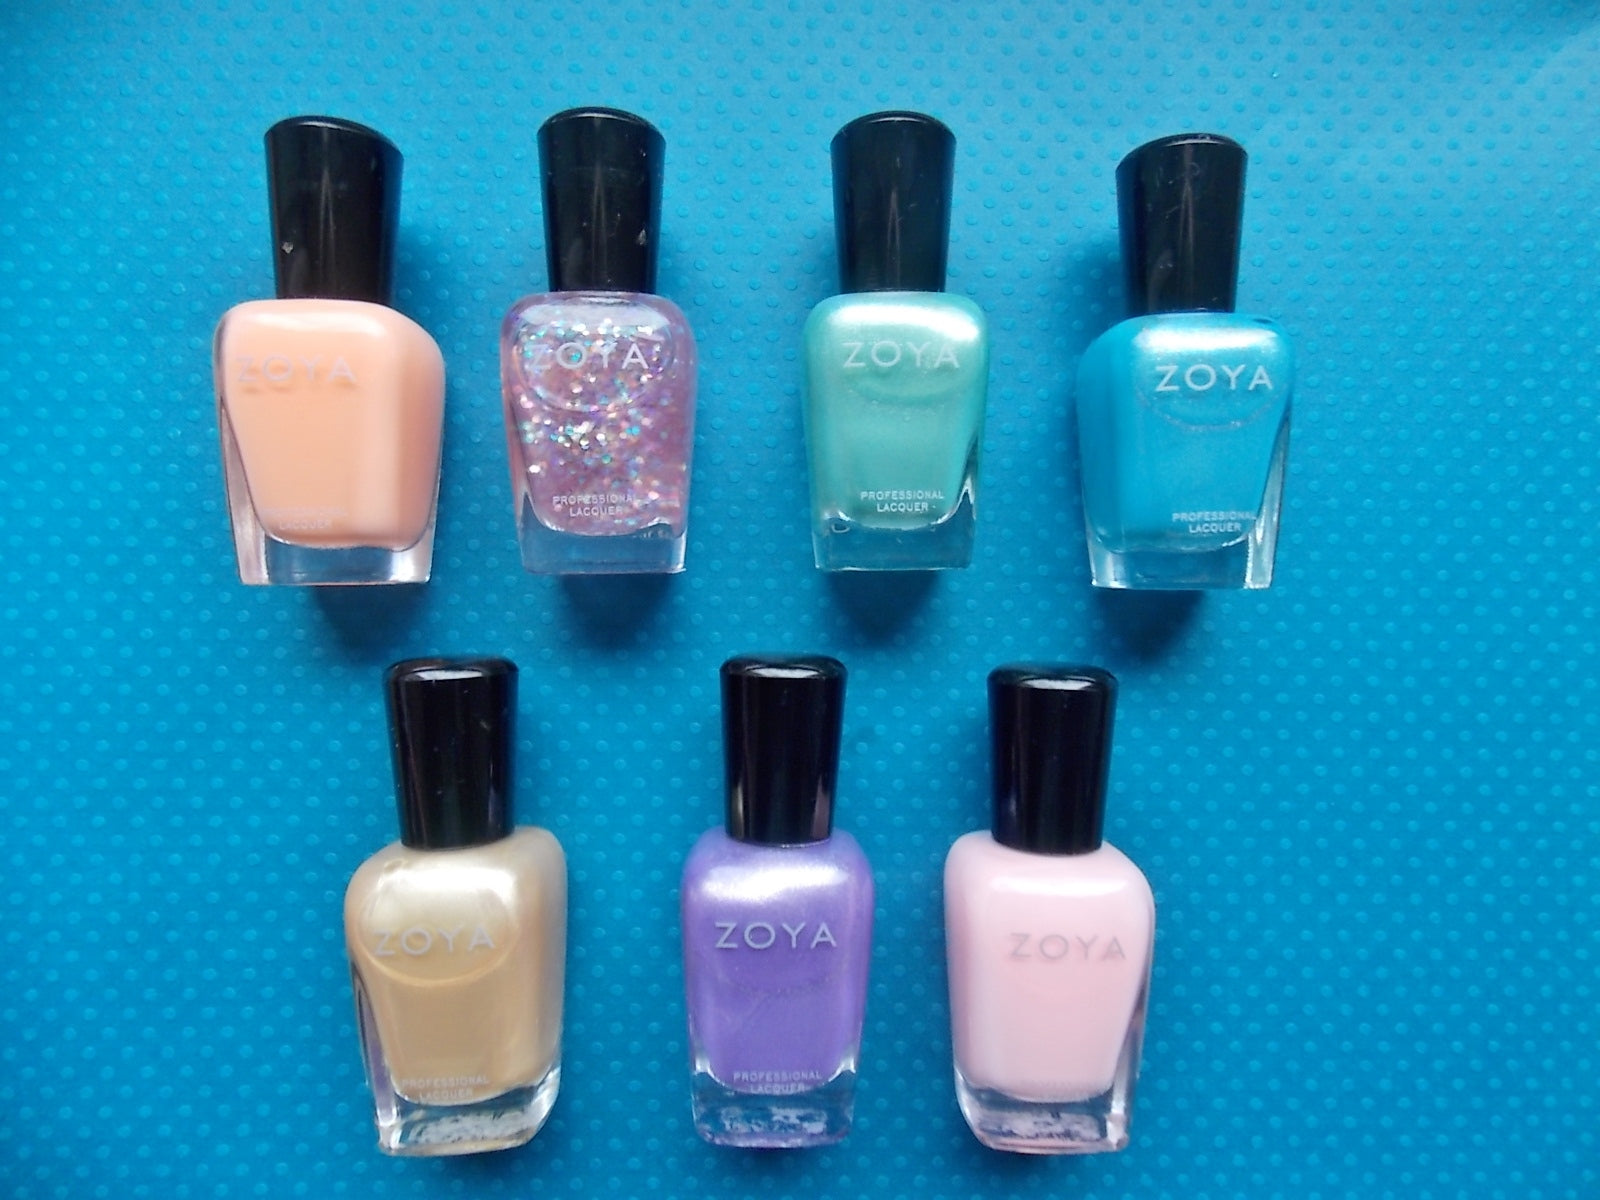 Review, Swatches: Spring 2014 Zoya Awaken Nail Polish Collection - Pastel Shades With Metallic Finishes